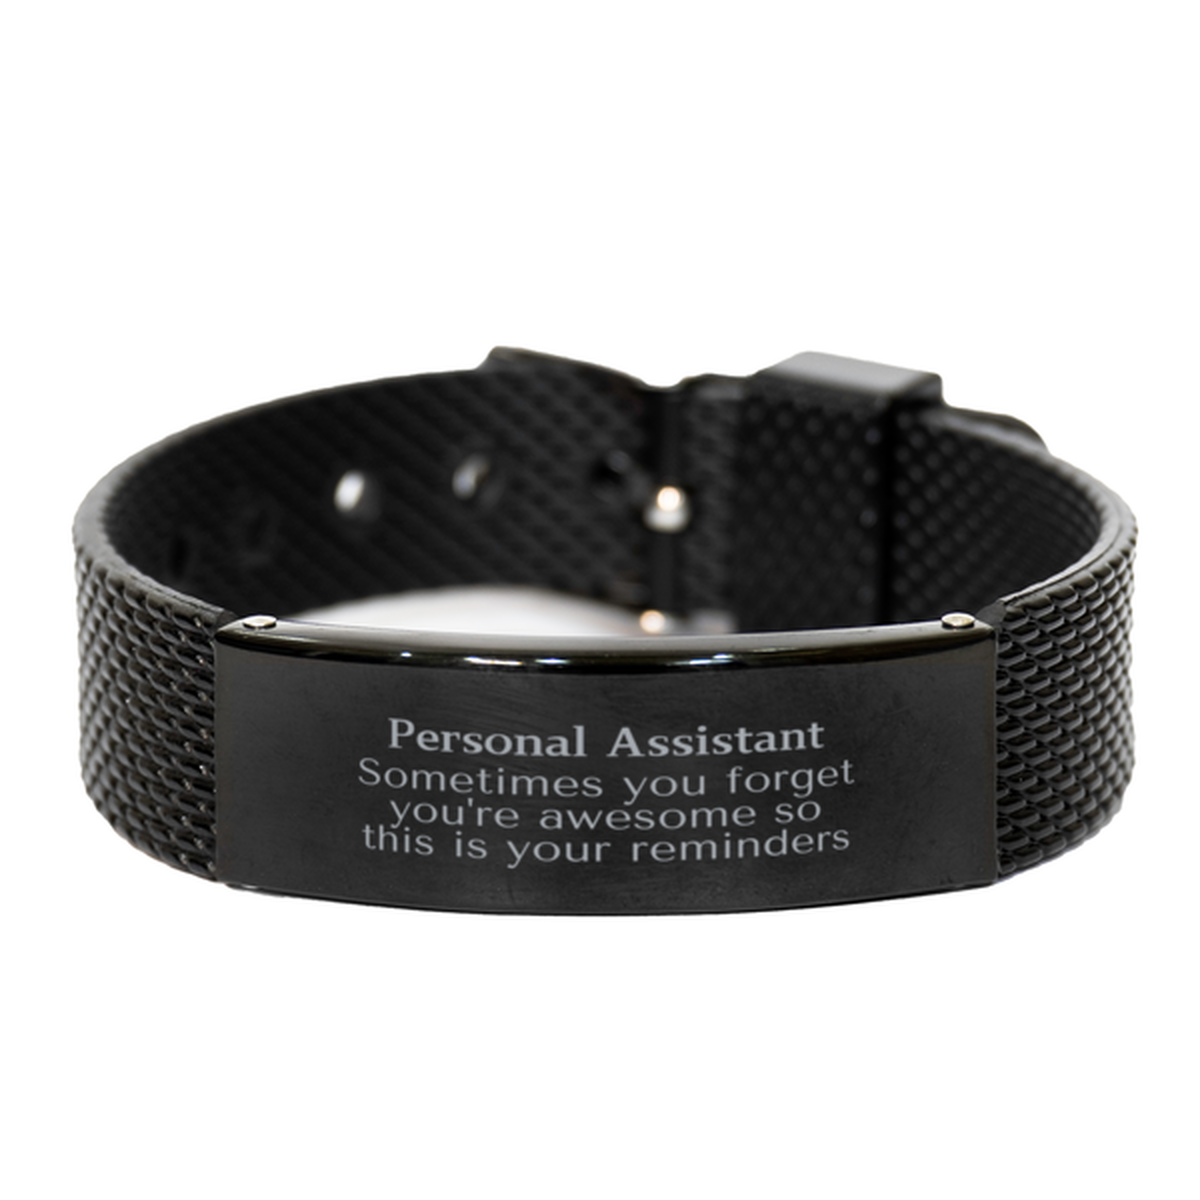 Sentimental Personal Assistant Black Shark Mesh Bracelet, Personal Assistant Sometimes you forget you're awesome so this is your reminders, Graduation Christmas Birthday Gifts for Personal Assistant, Men, Women, Coworkers